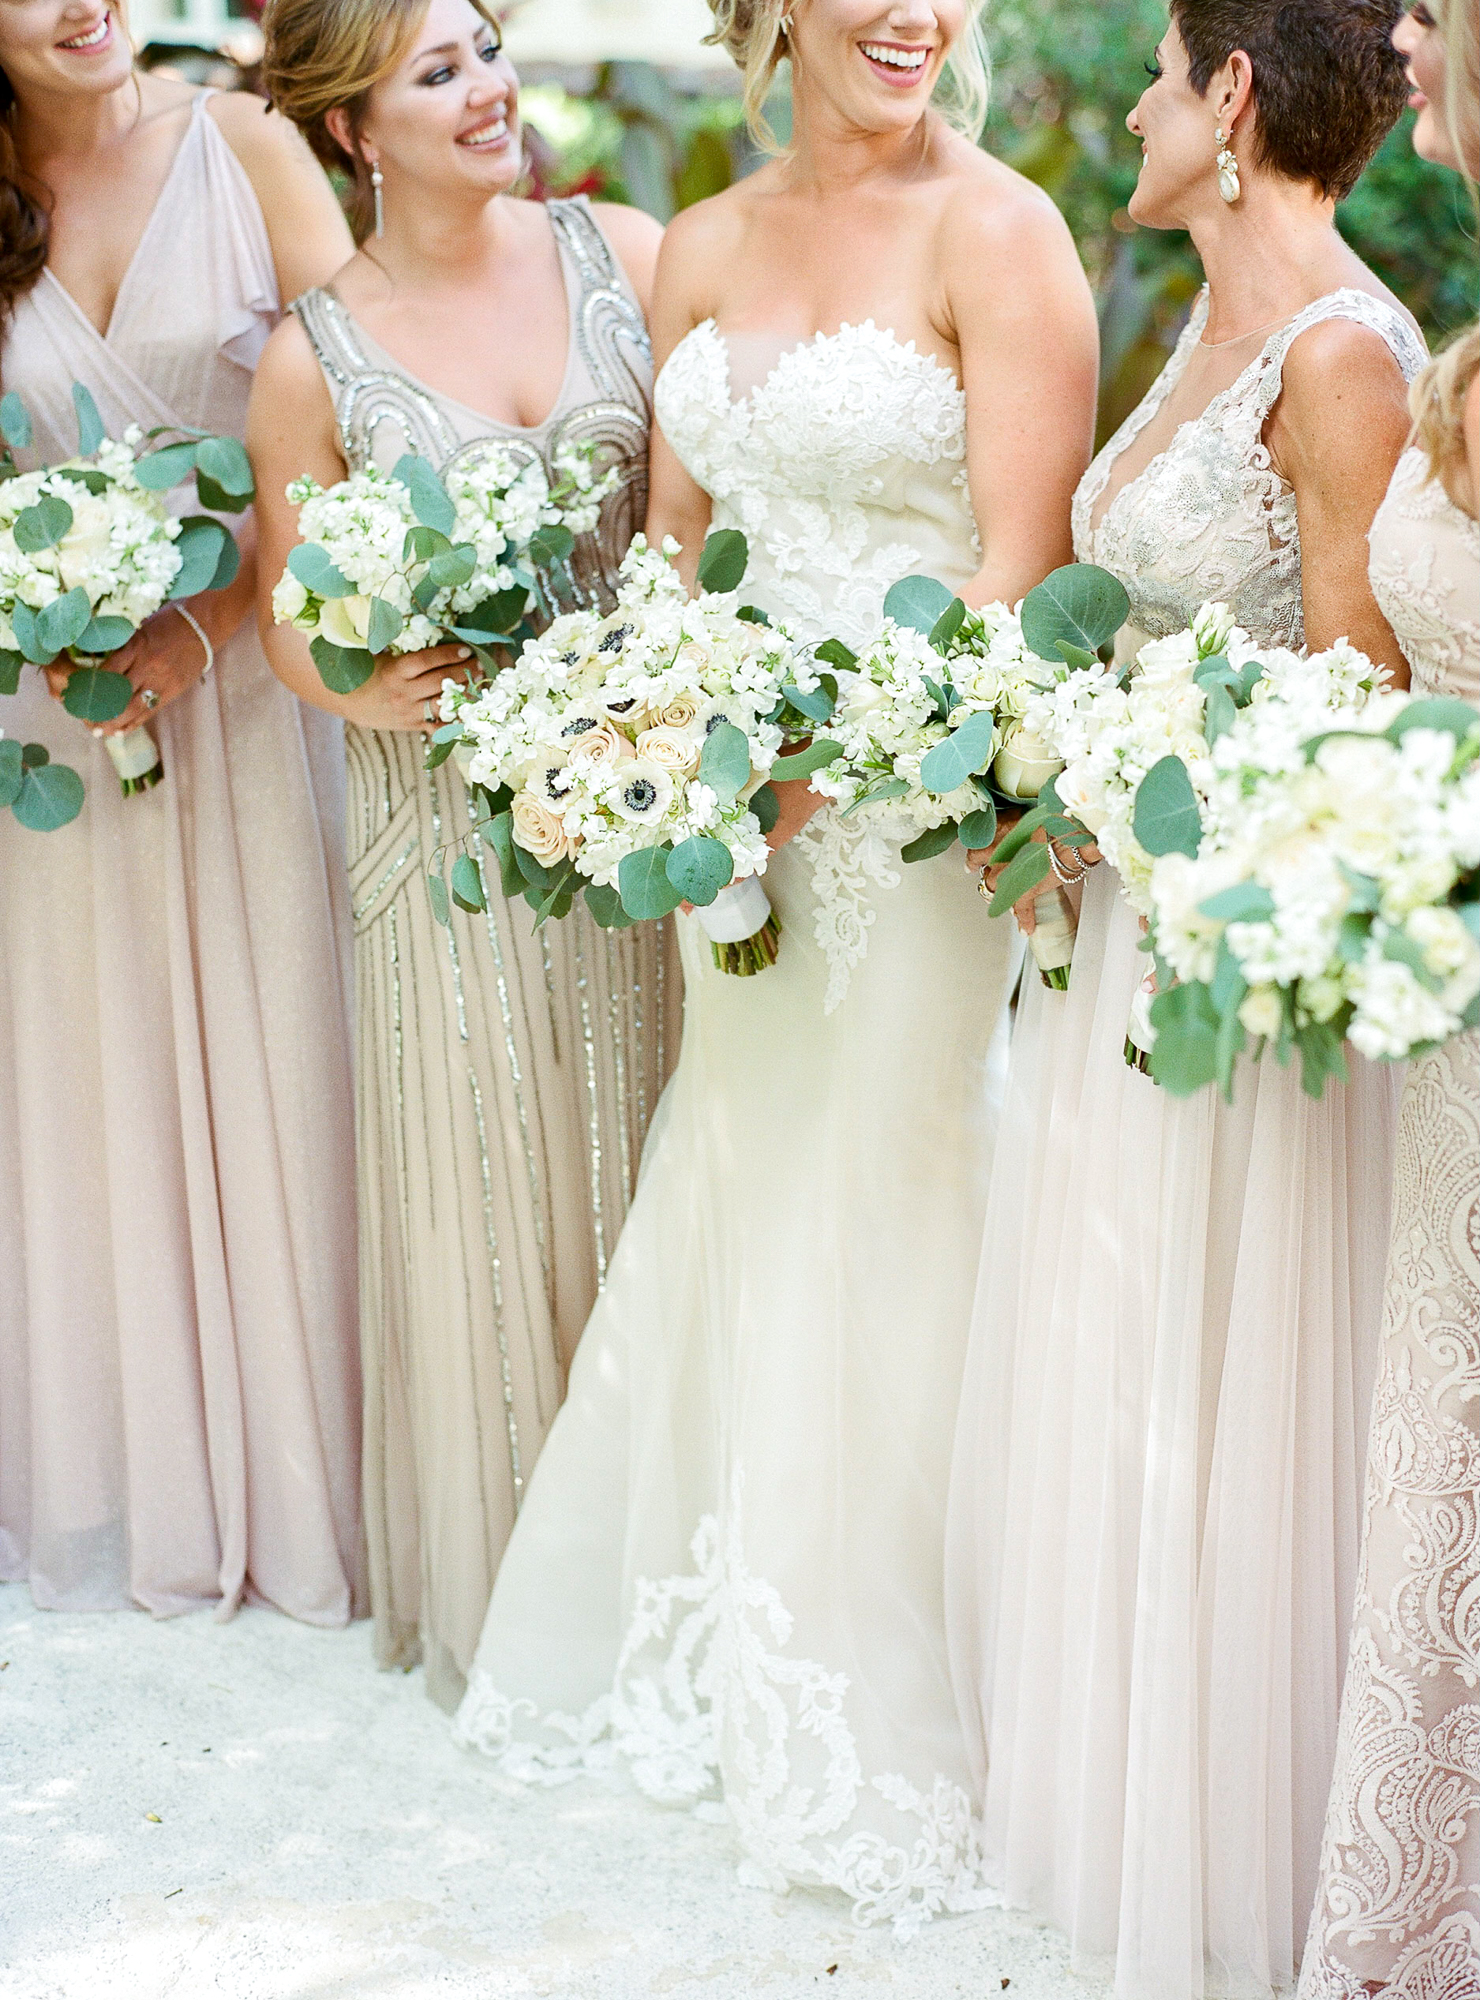 The bride had a eucalyptus bouquet with anemone flowers and blush roses